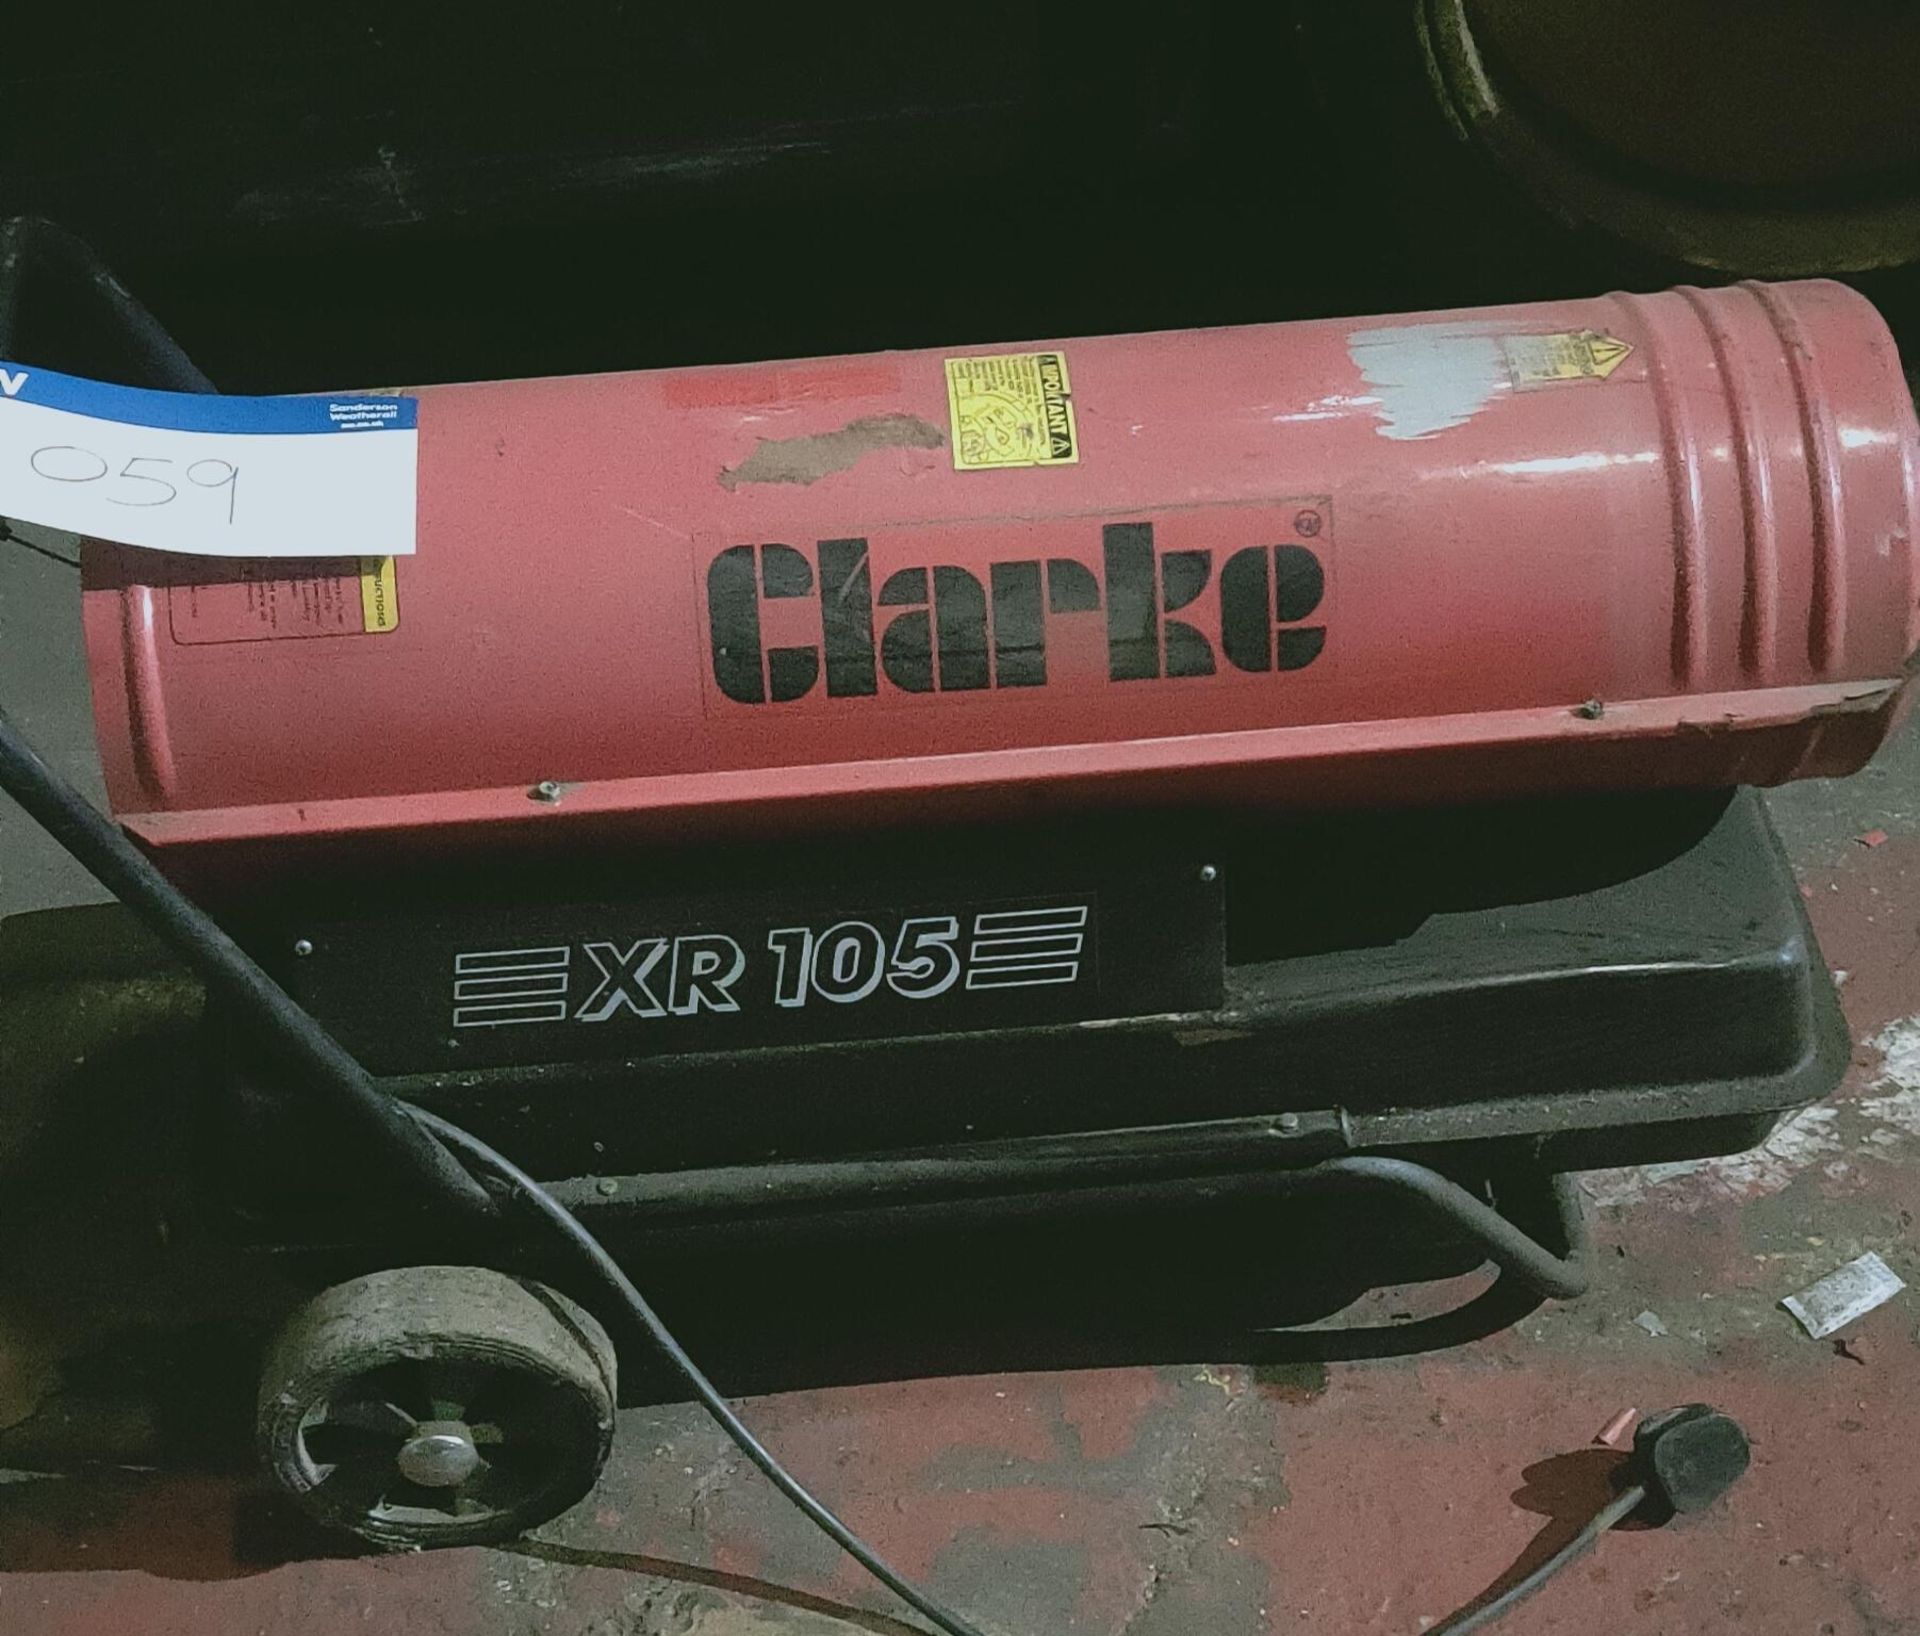 Clarke XR105 Electric Parafin Heater, approx. 80cm x 25cm x 50cm, loading free of charge - yes (